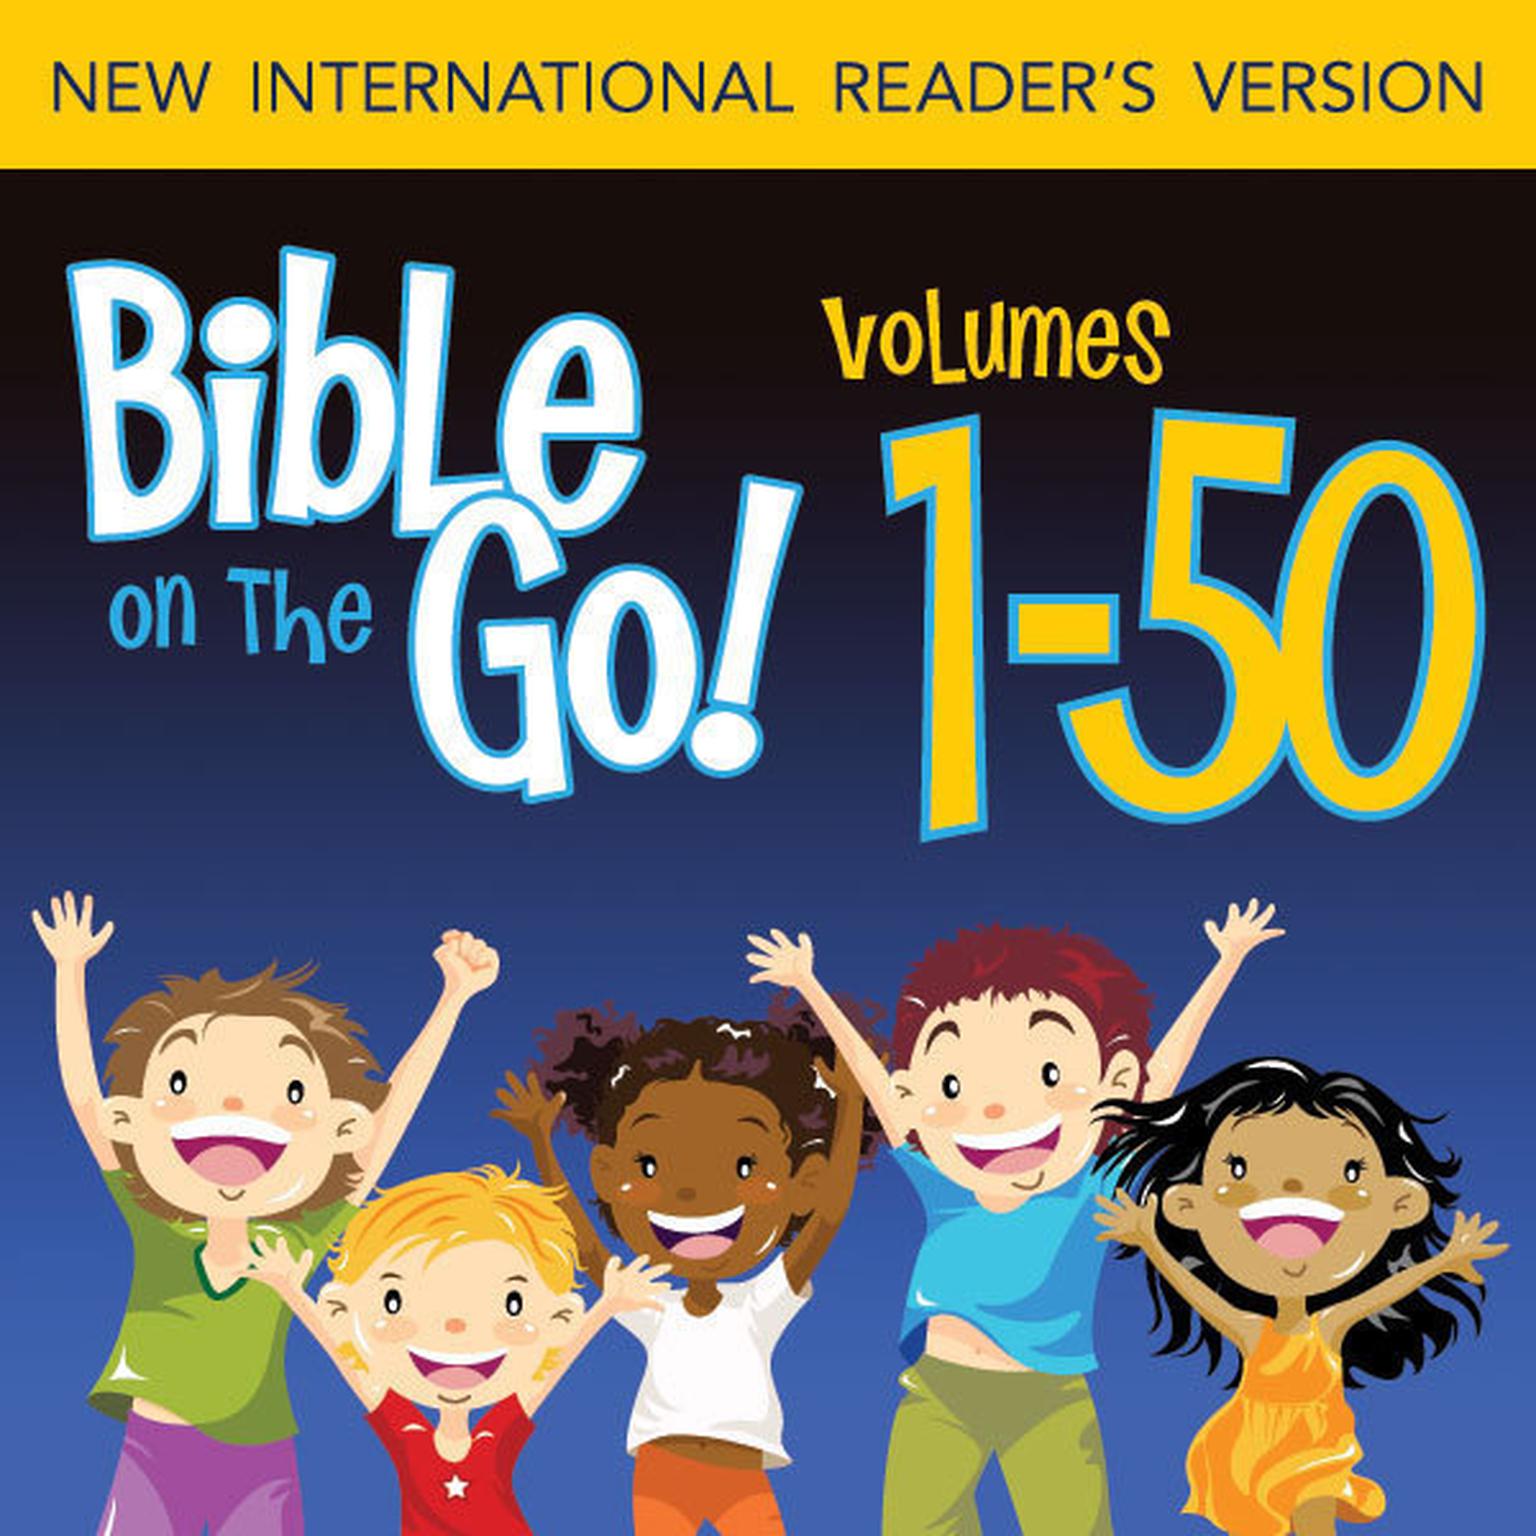 Bible on the Go Audio Bible - New International Readers Version, NIrV: Vols. 1-50 from the Old and New Testaments Audiobook, by Zondervan